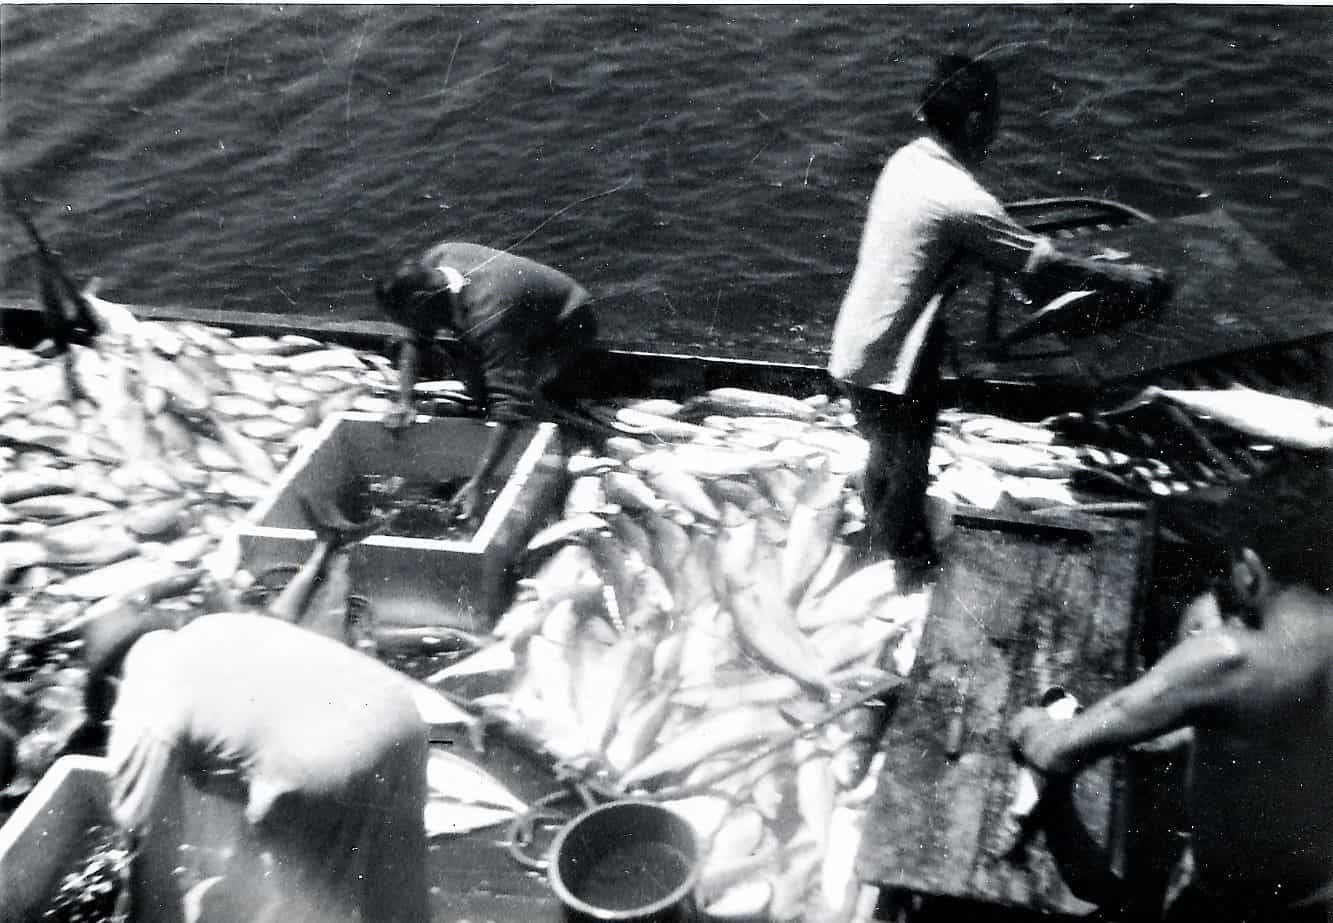 Catching kingfish back in the 1960s.